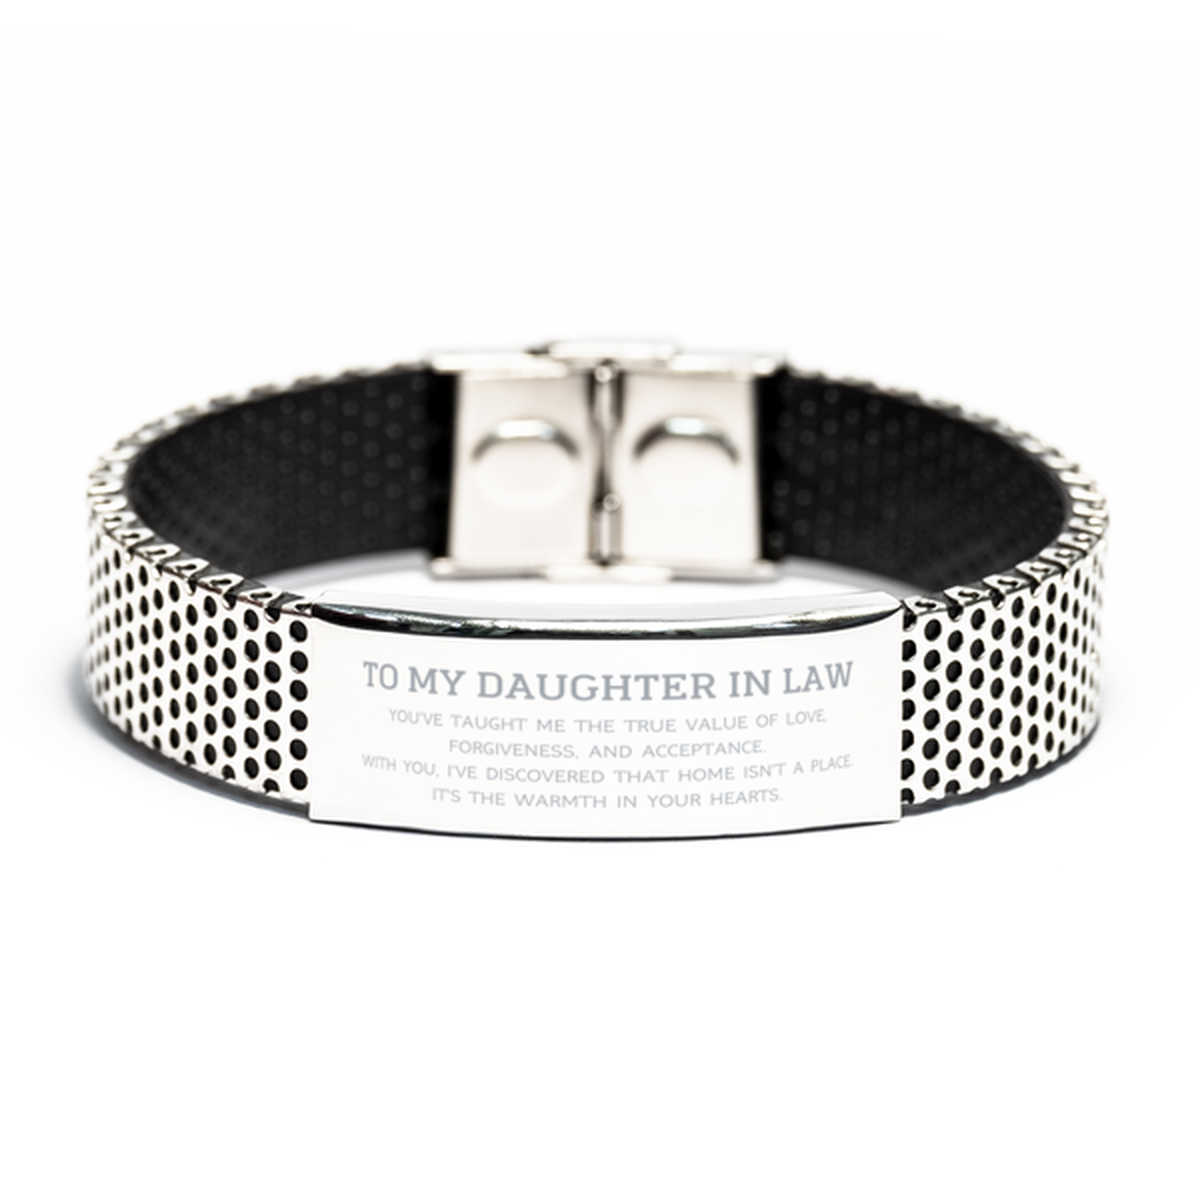 To My Daughter In Law Gifts, You've taught me the true value of love, Thank You Gifts For Daughter In Law, Birthday Stainless Steel Bracelet For Daughter In Law